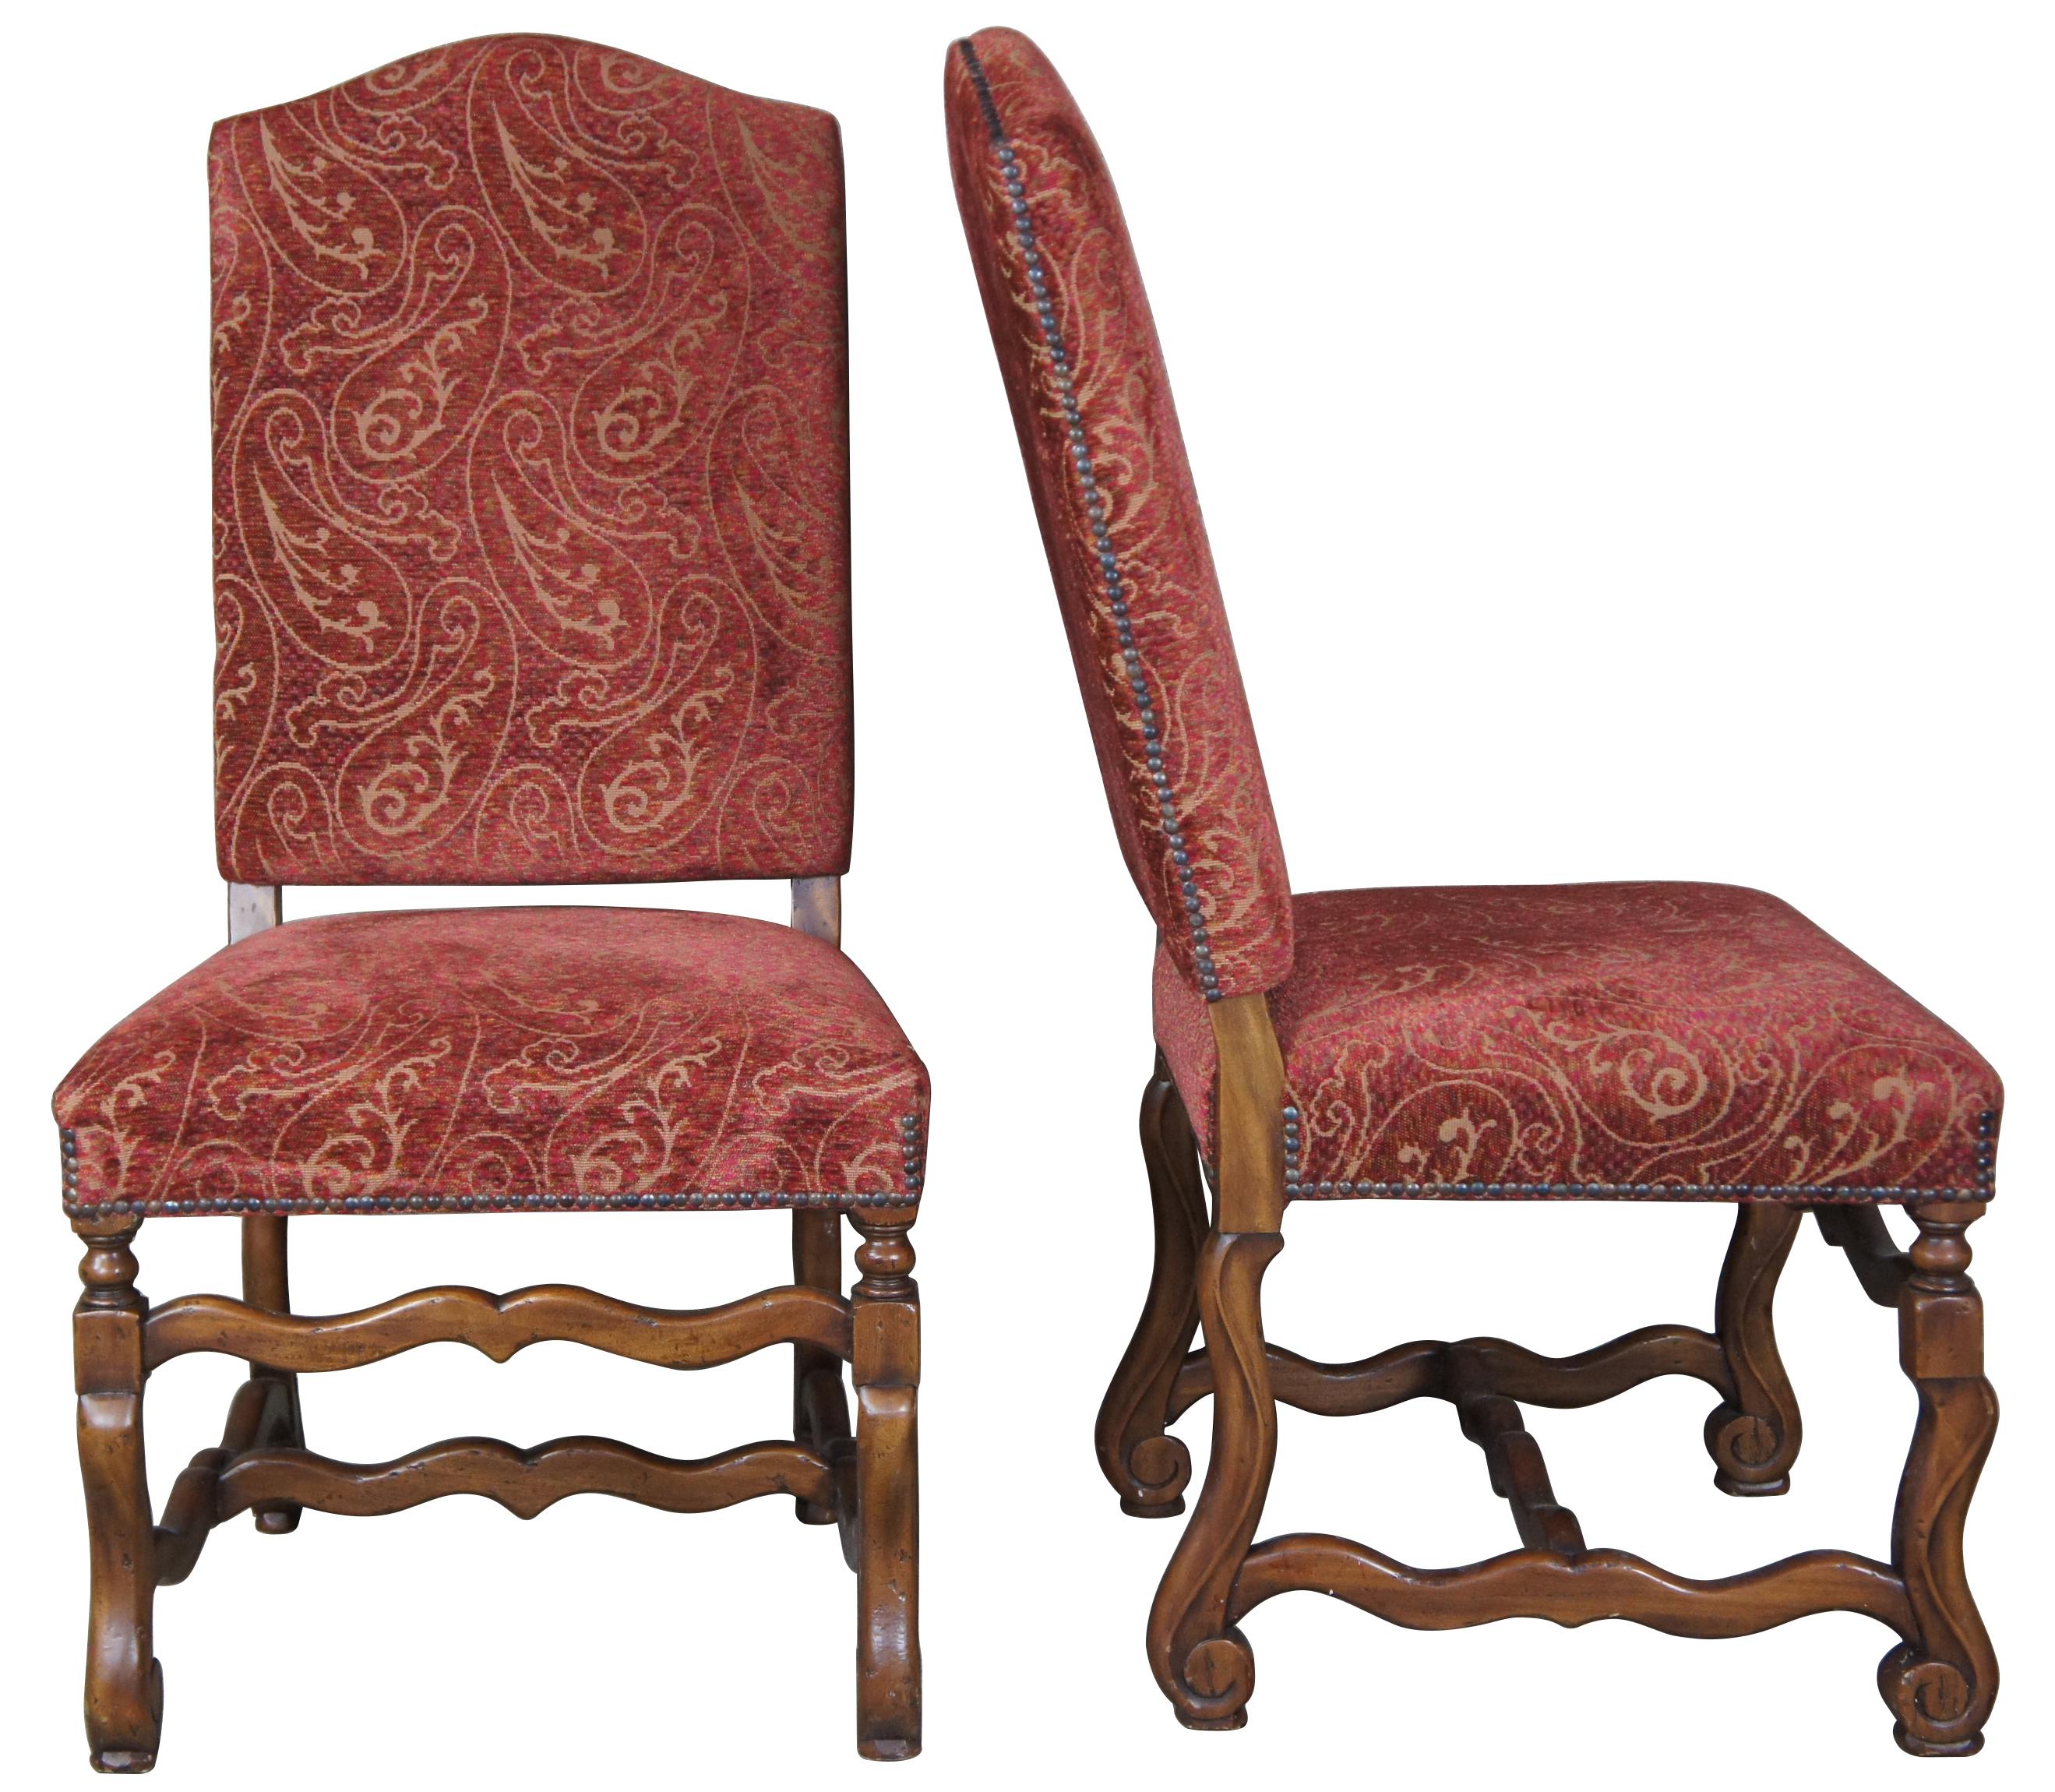 Set of ten Arte De Mexico style oak chairs. Features Tuscan / Spanish Revival or Louis XIII styling with a paisley upholstery accented with nailhead trim. Scrolled feet are connected by serpentine H-stretcher.
 